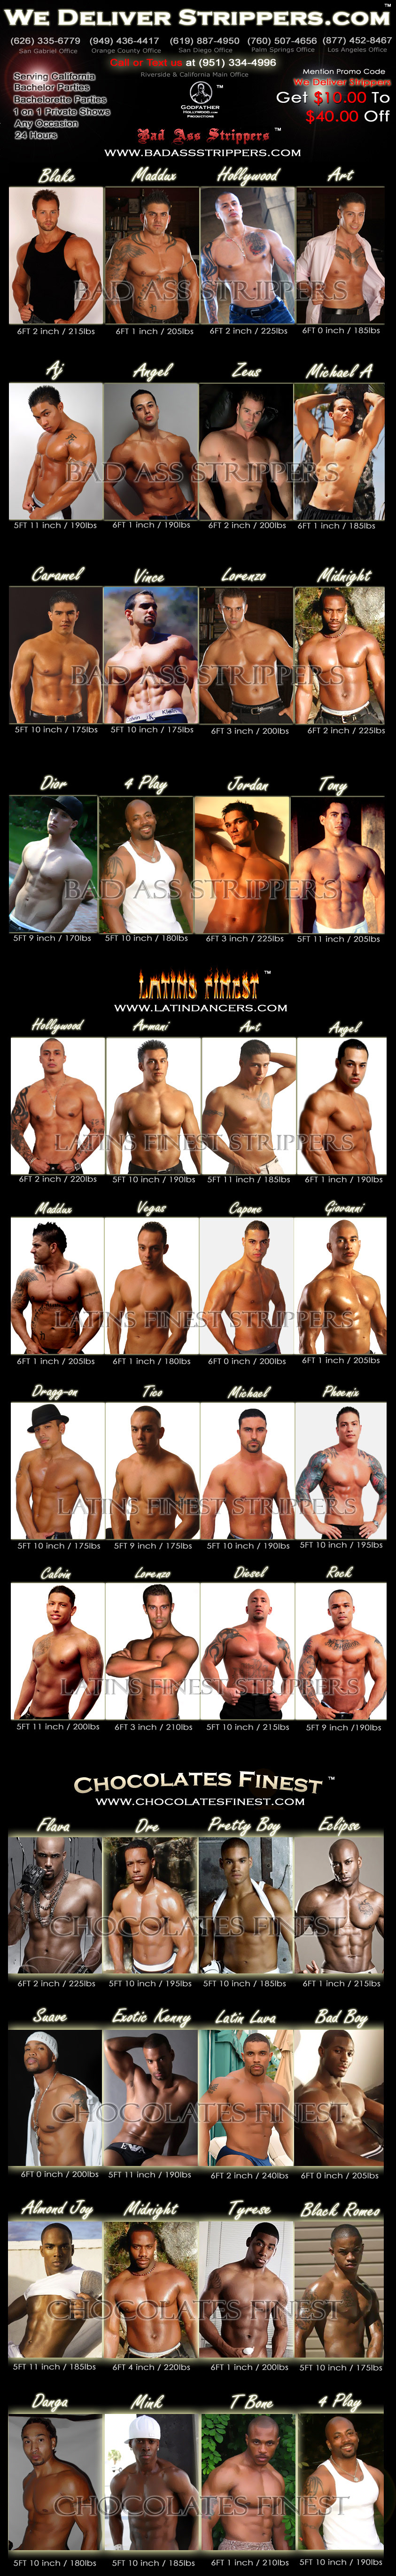 Male Strippers Los Angeles